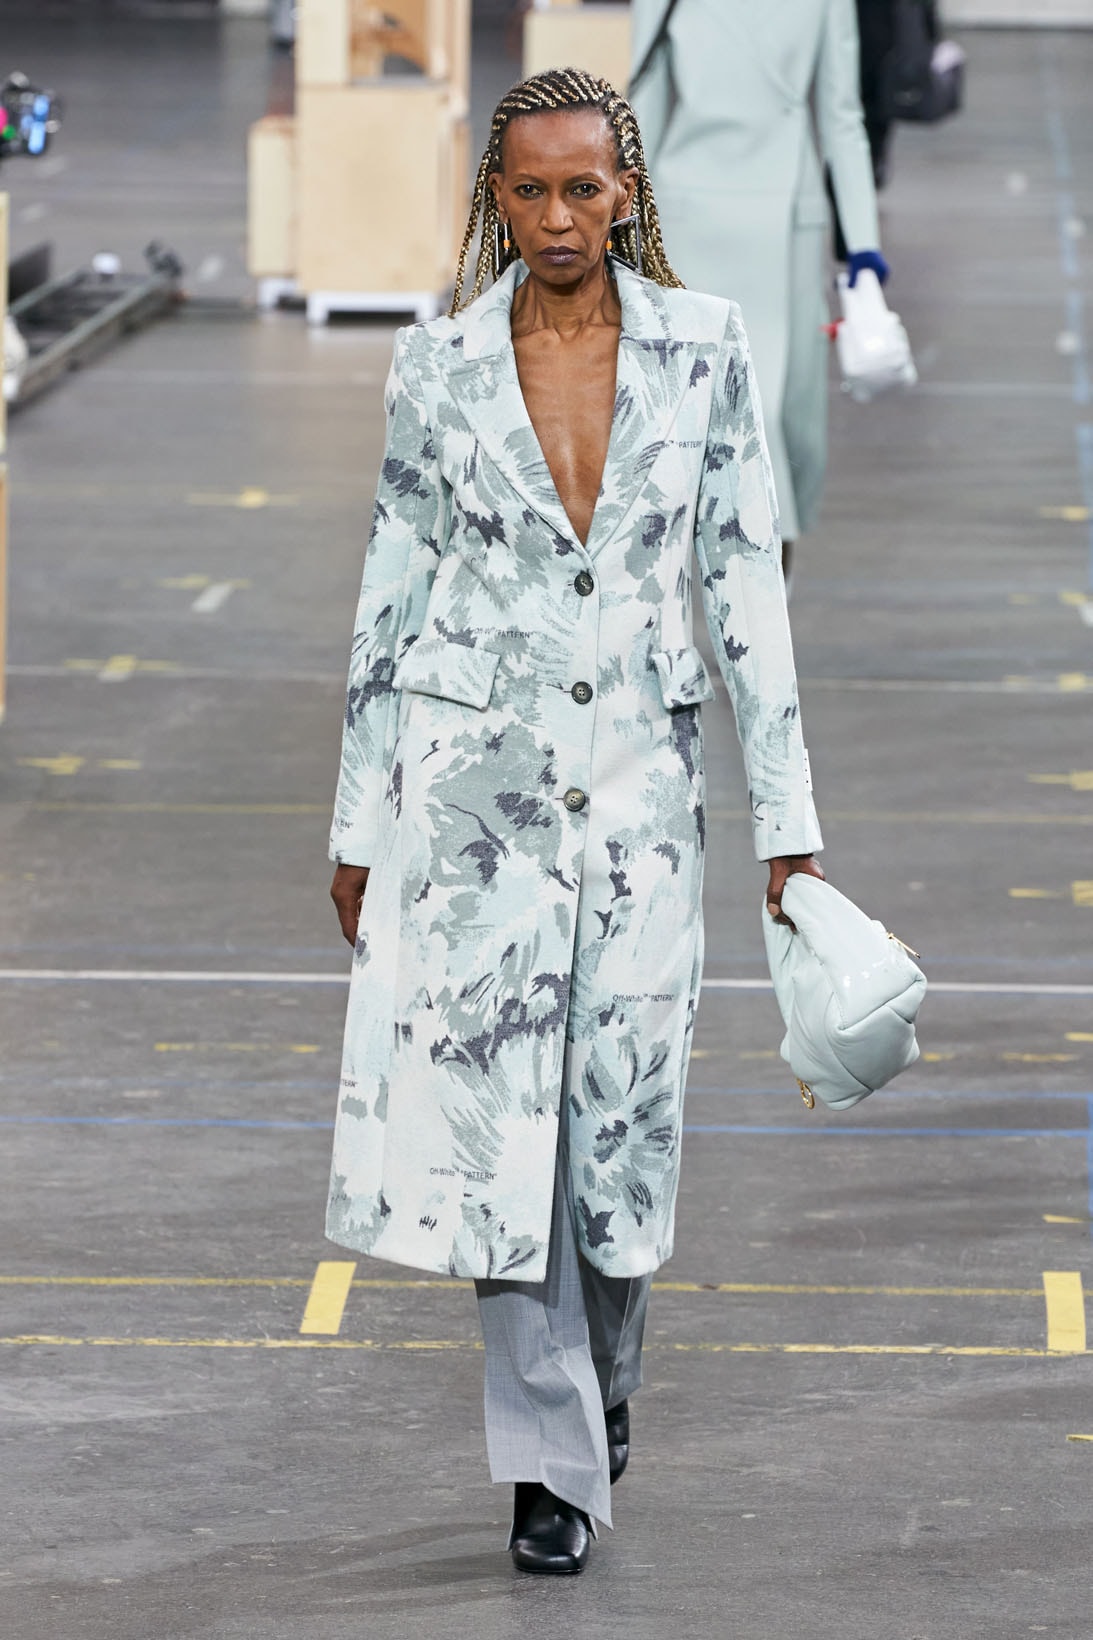 off-white virgil abloh fall winter collection runway laboratory of fun bella hadid amber valletta joan smalls m.i.a. watch 